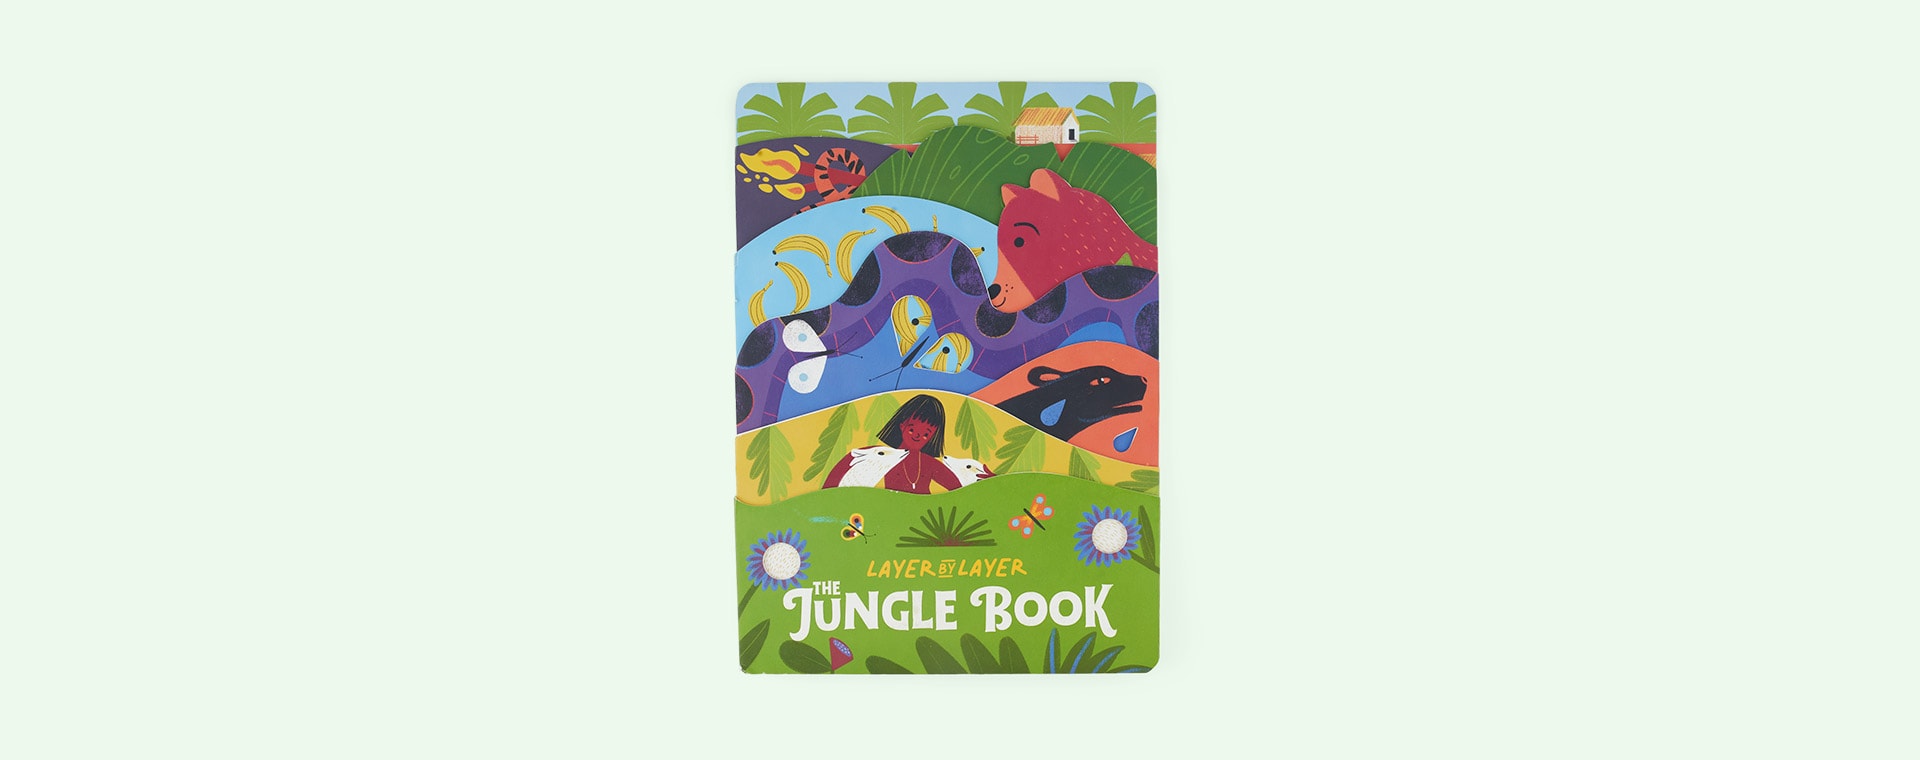 Layer by Layer Jungle book bookspeed Layer By Layer Jungle Book